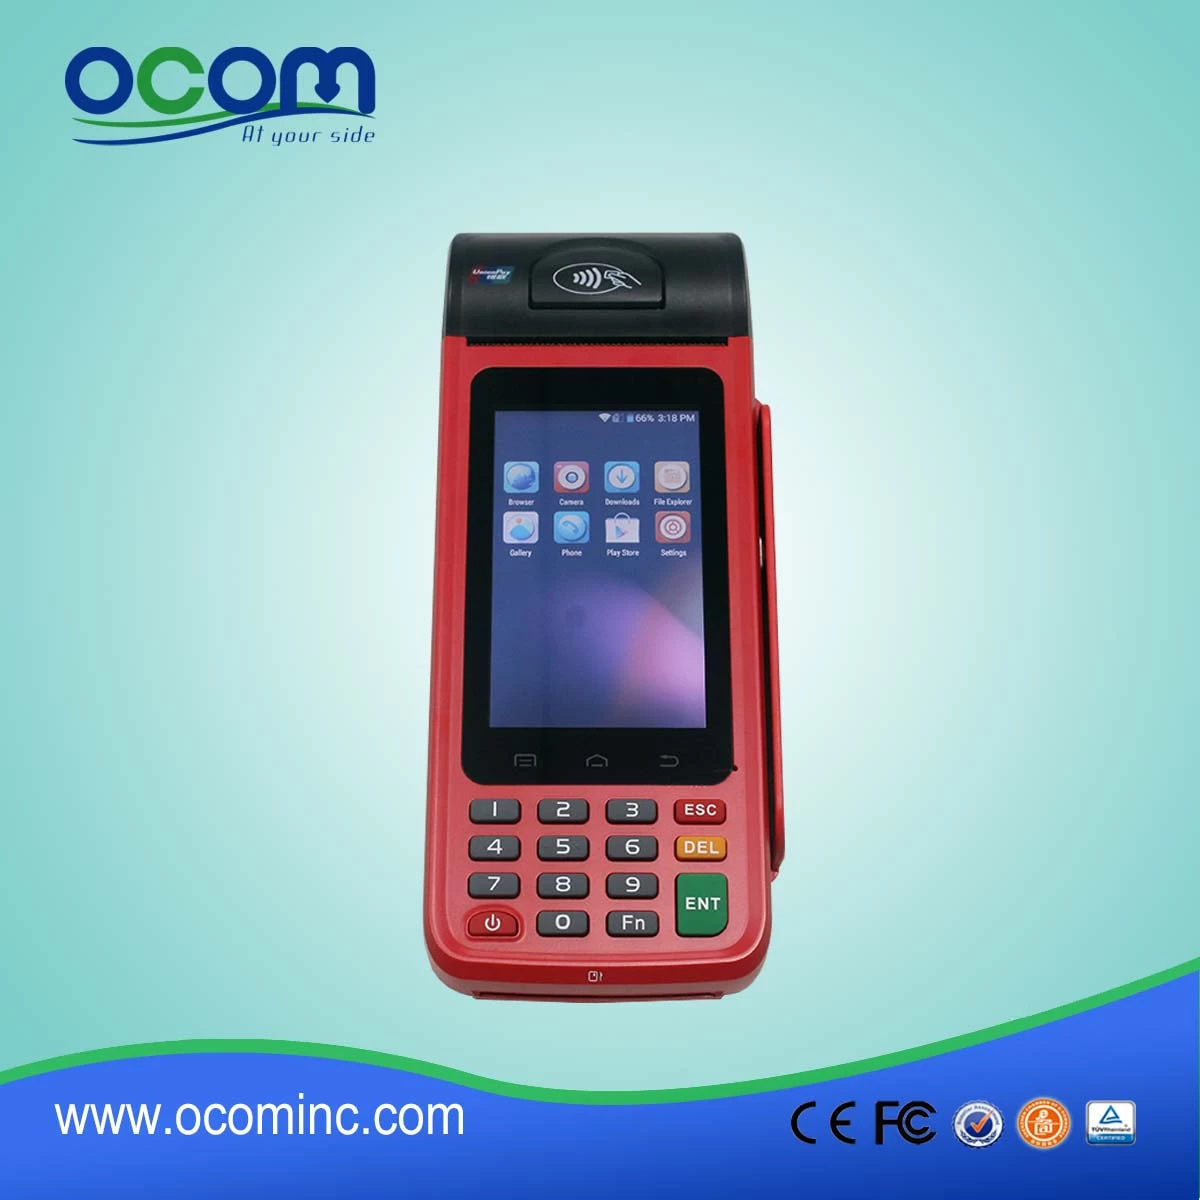 P8000 Wireless Android 3g Handheld POS Terminal